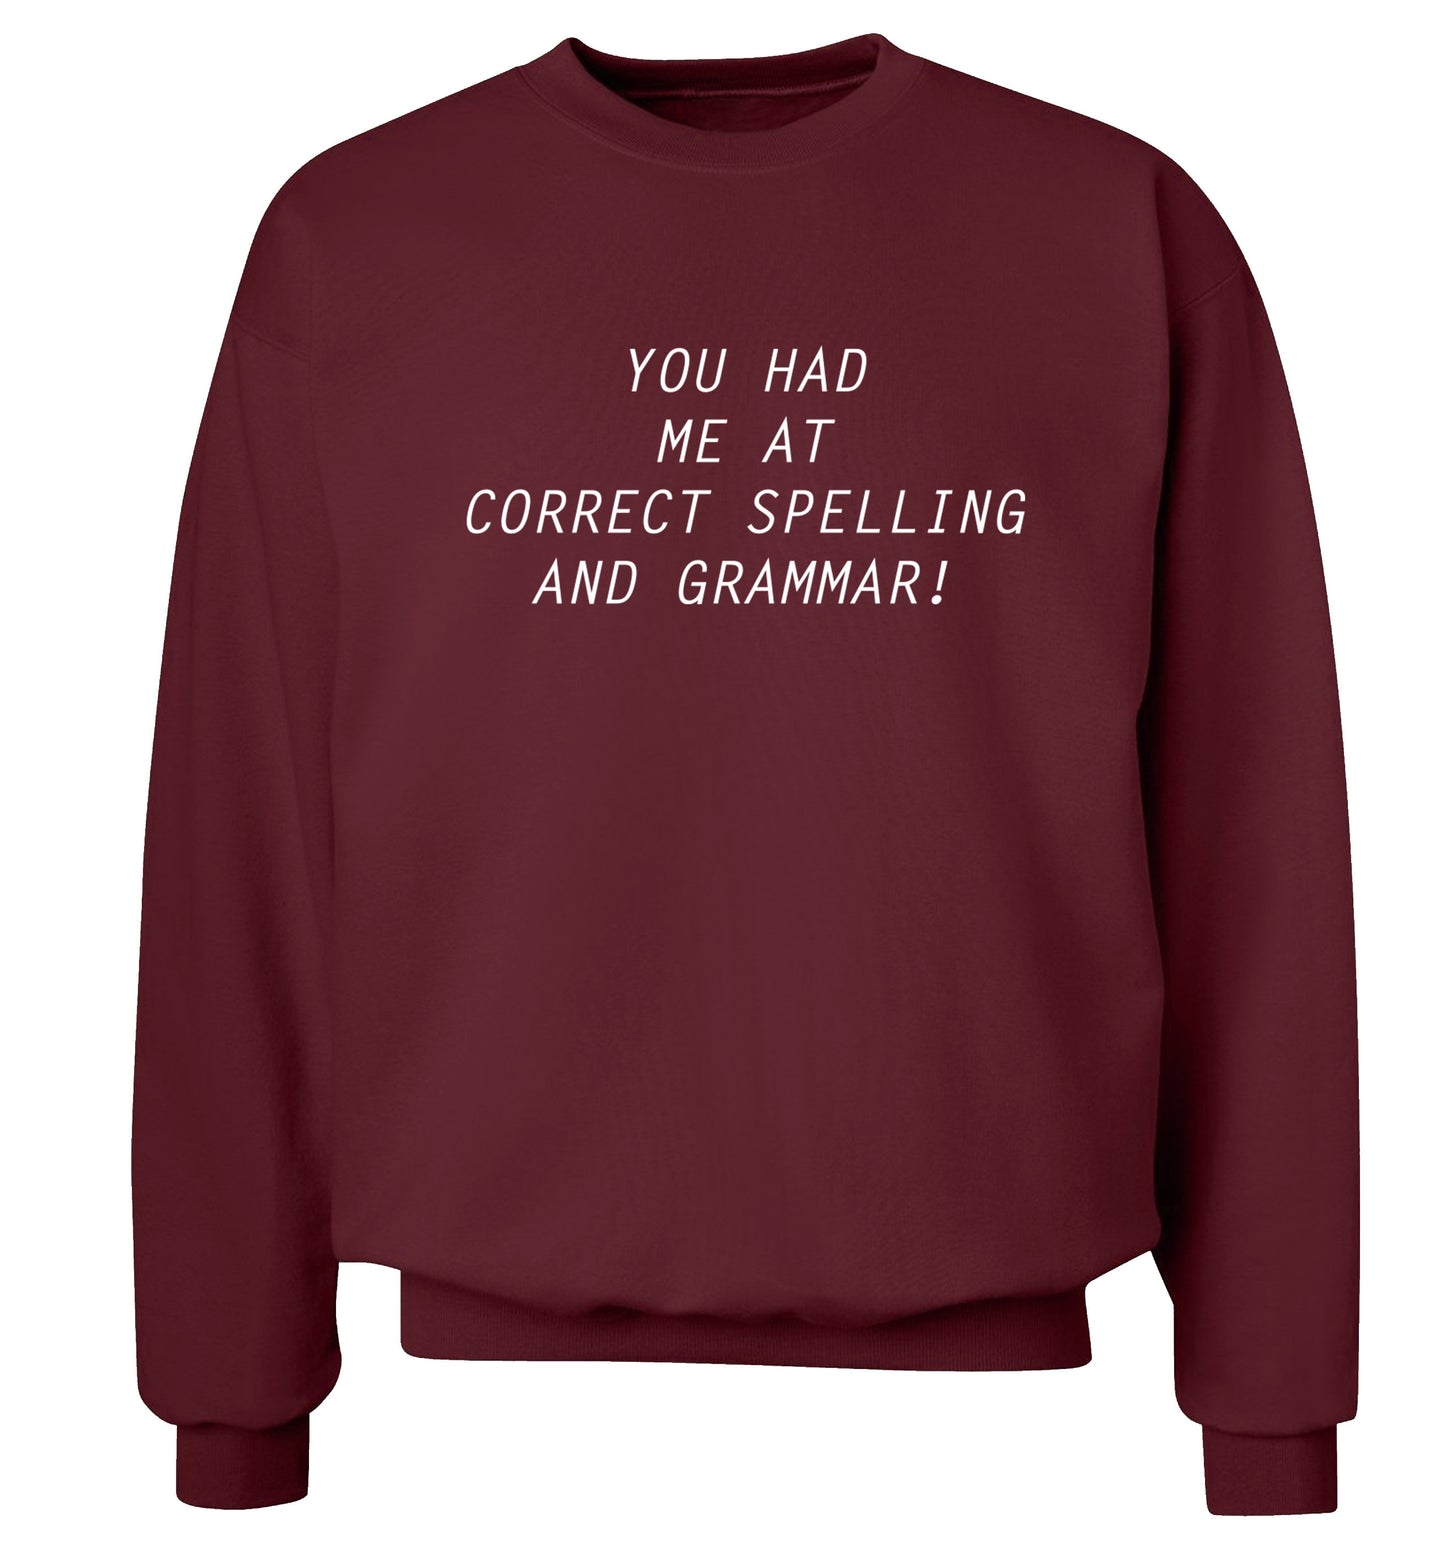 You had me at correct spelling and grammar Adult's unisex maroon Sweater 2XL